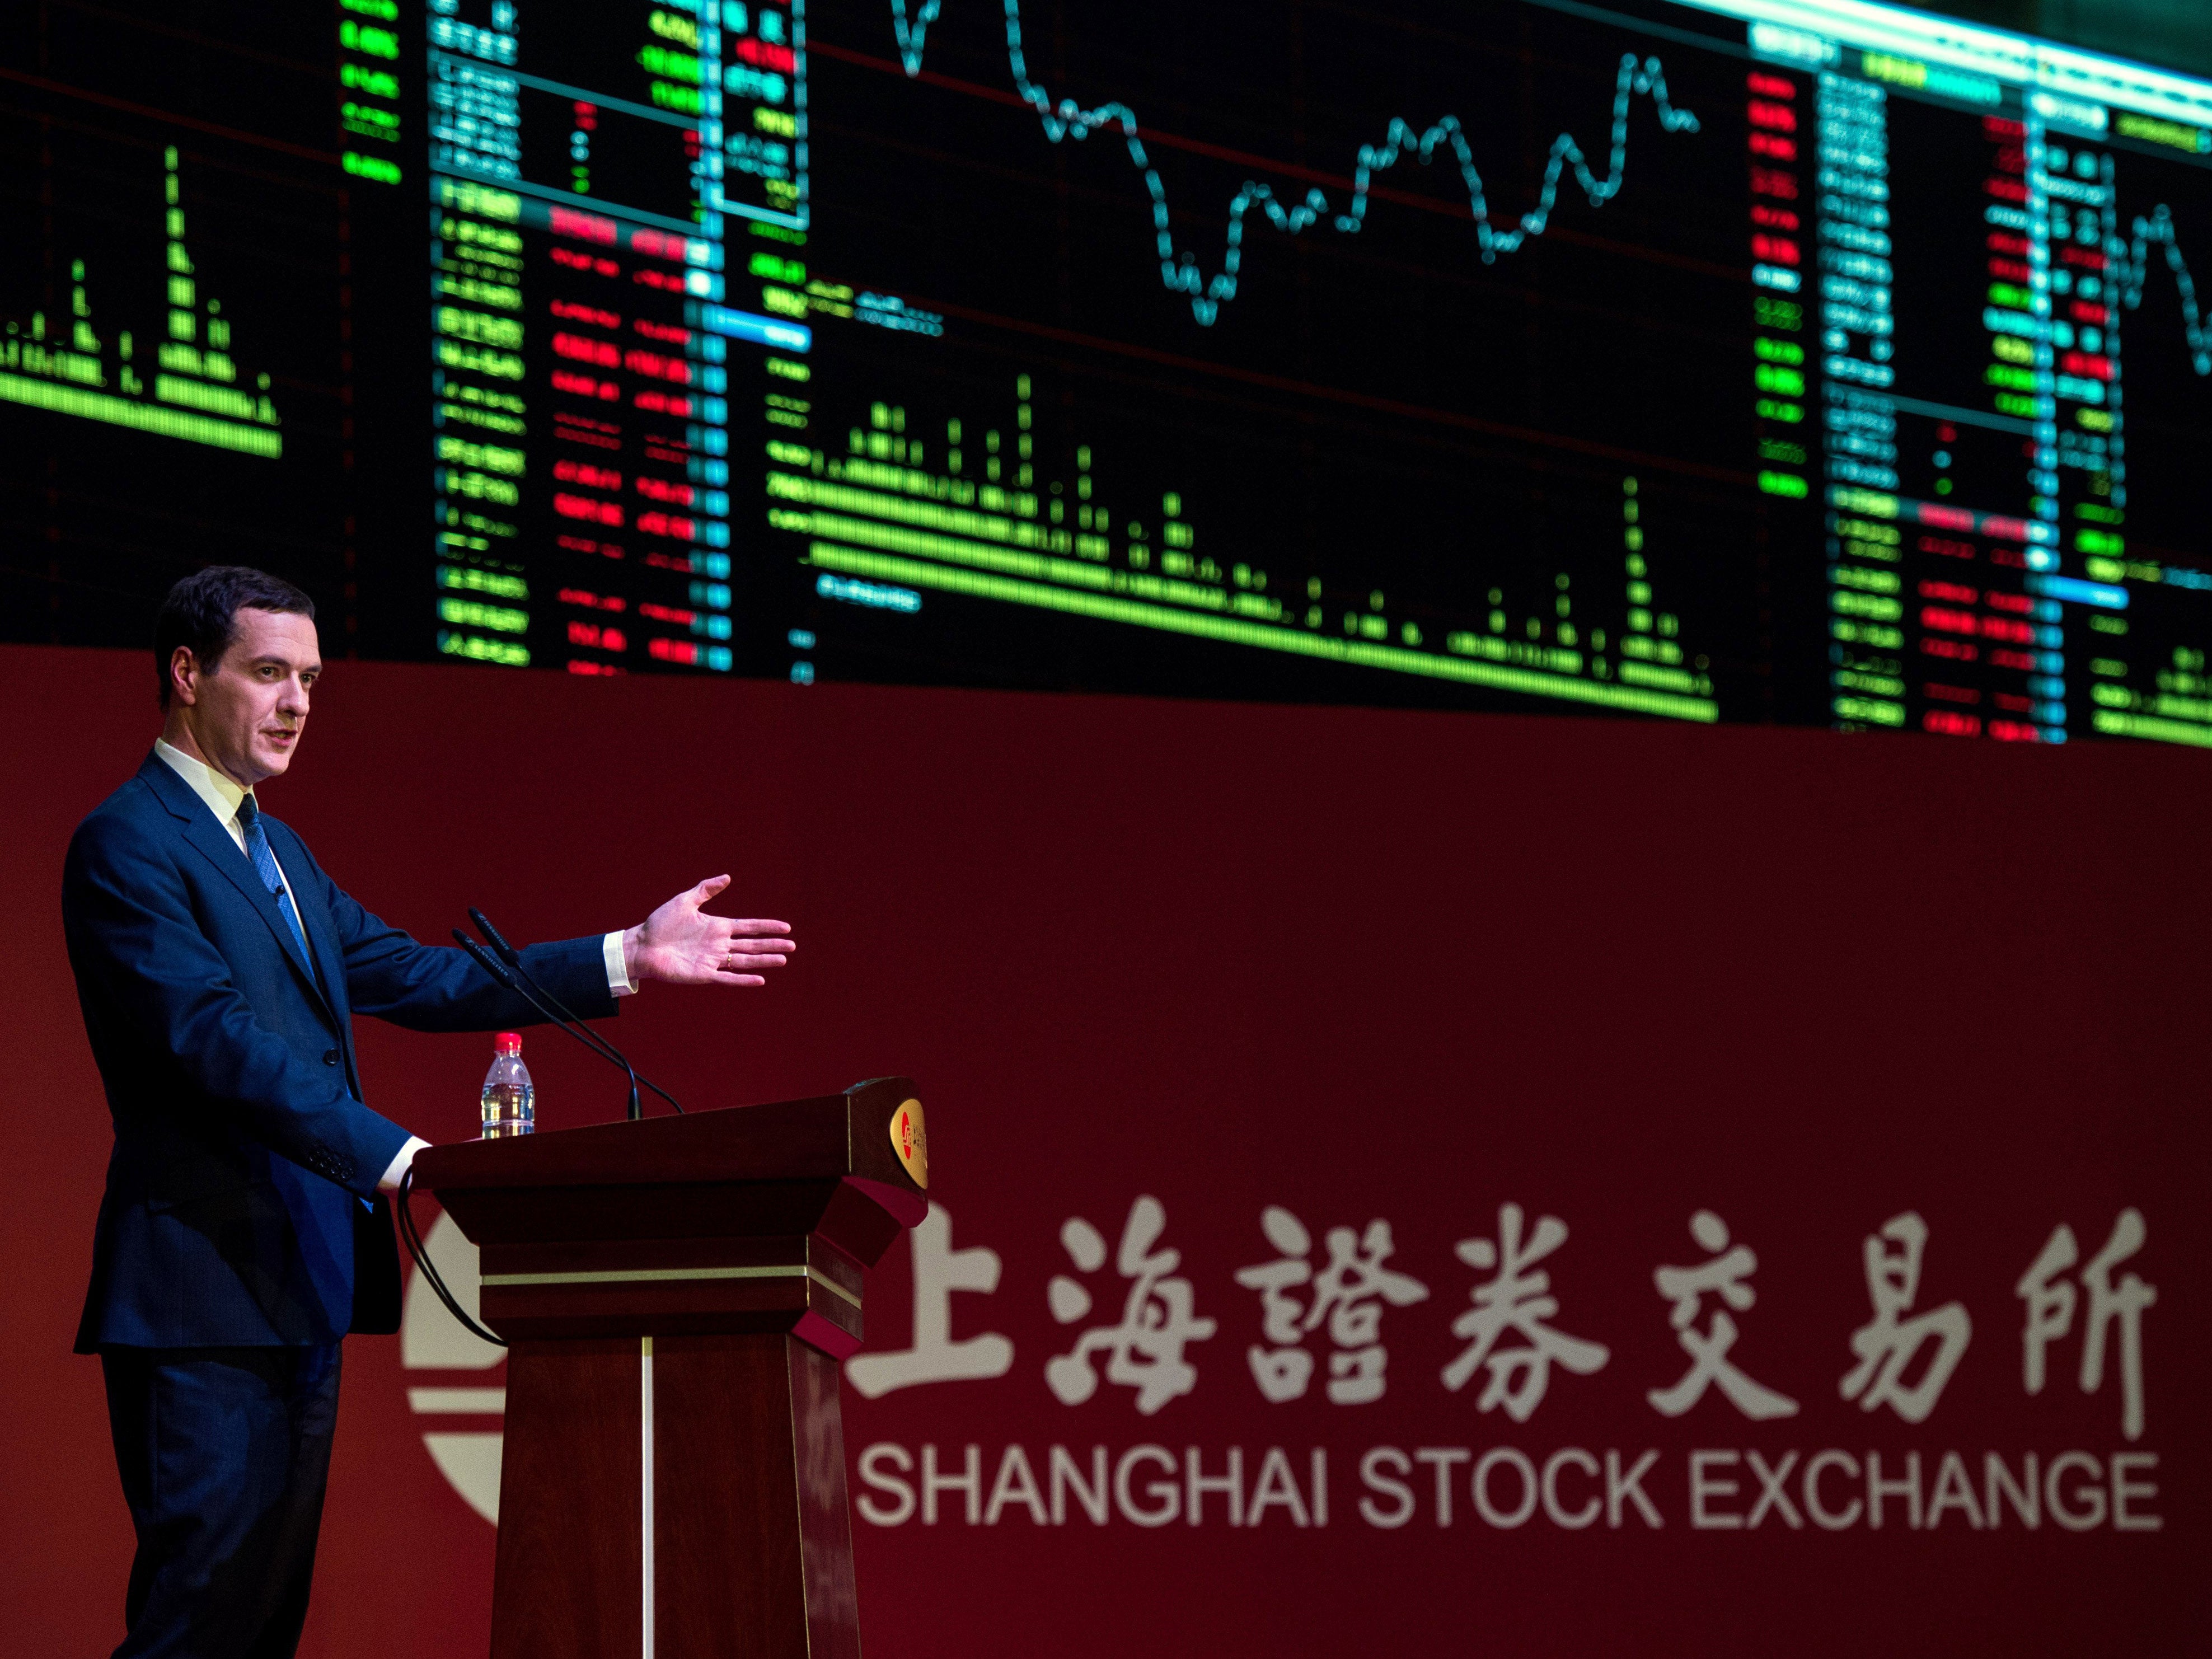 Britain's Chancellor of the Exchequer George Osborne delivers a speech at the Shanghai Stock Exchange in Shanghai on September 22, 2015. Osborne will urge closer business ties with China as he visits the country's commercial hub Shanghai on September 22,